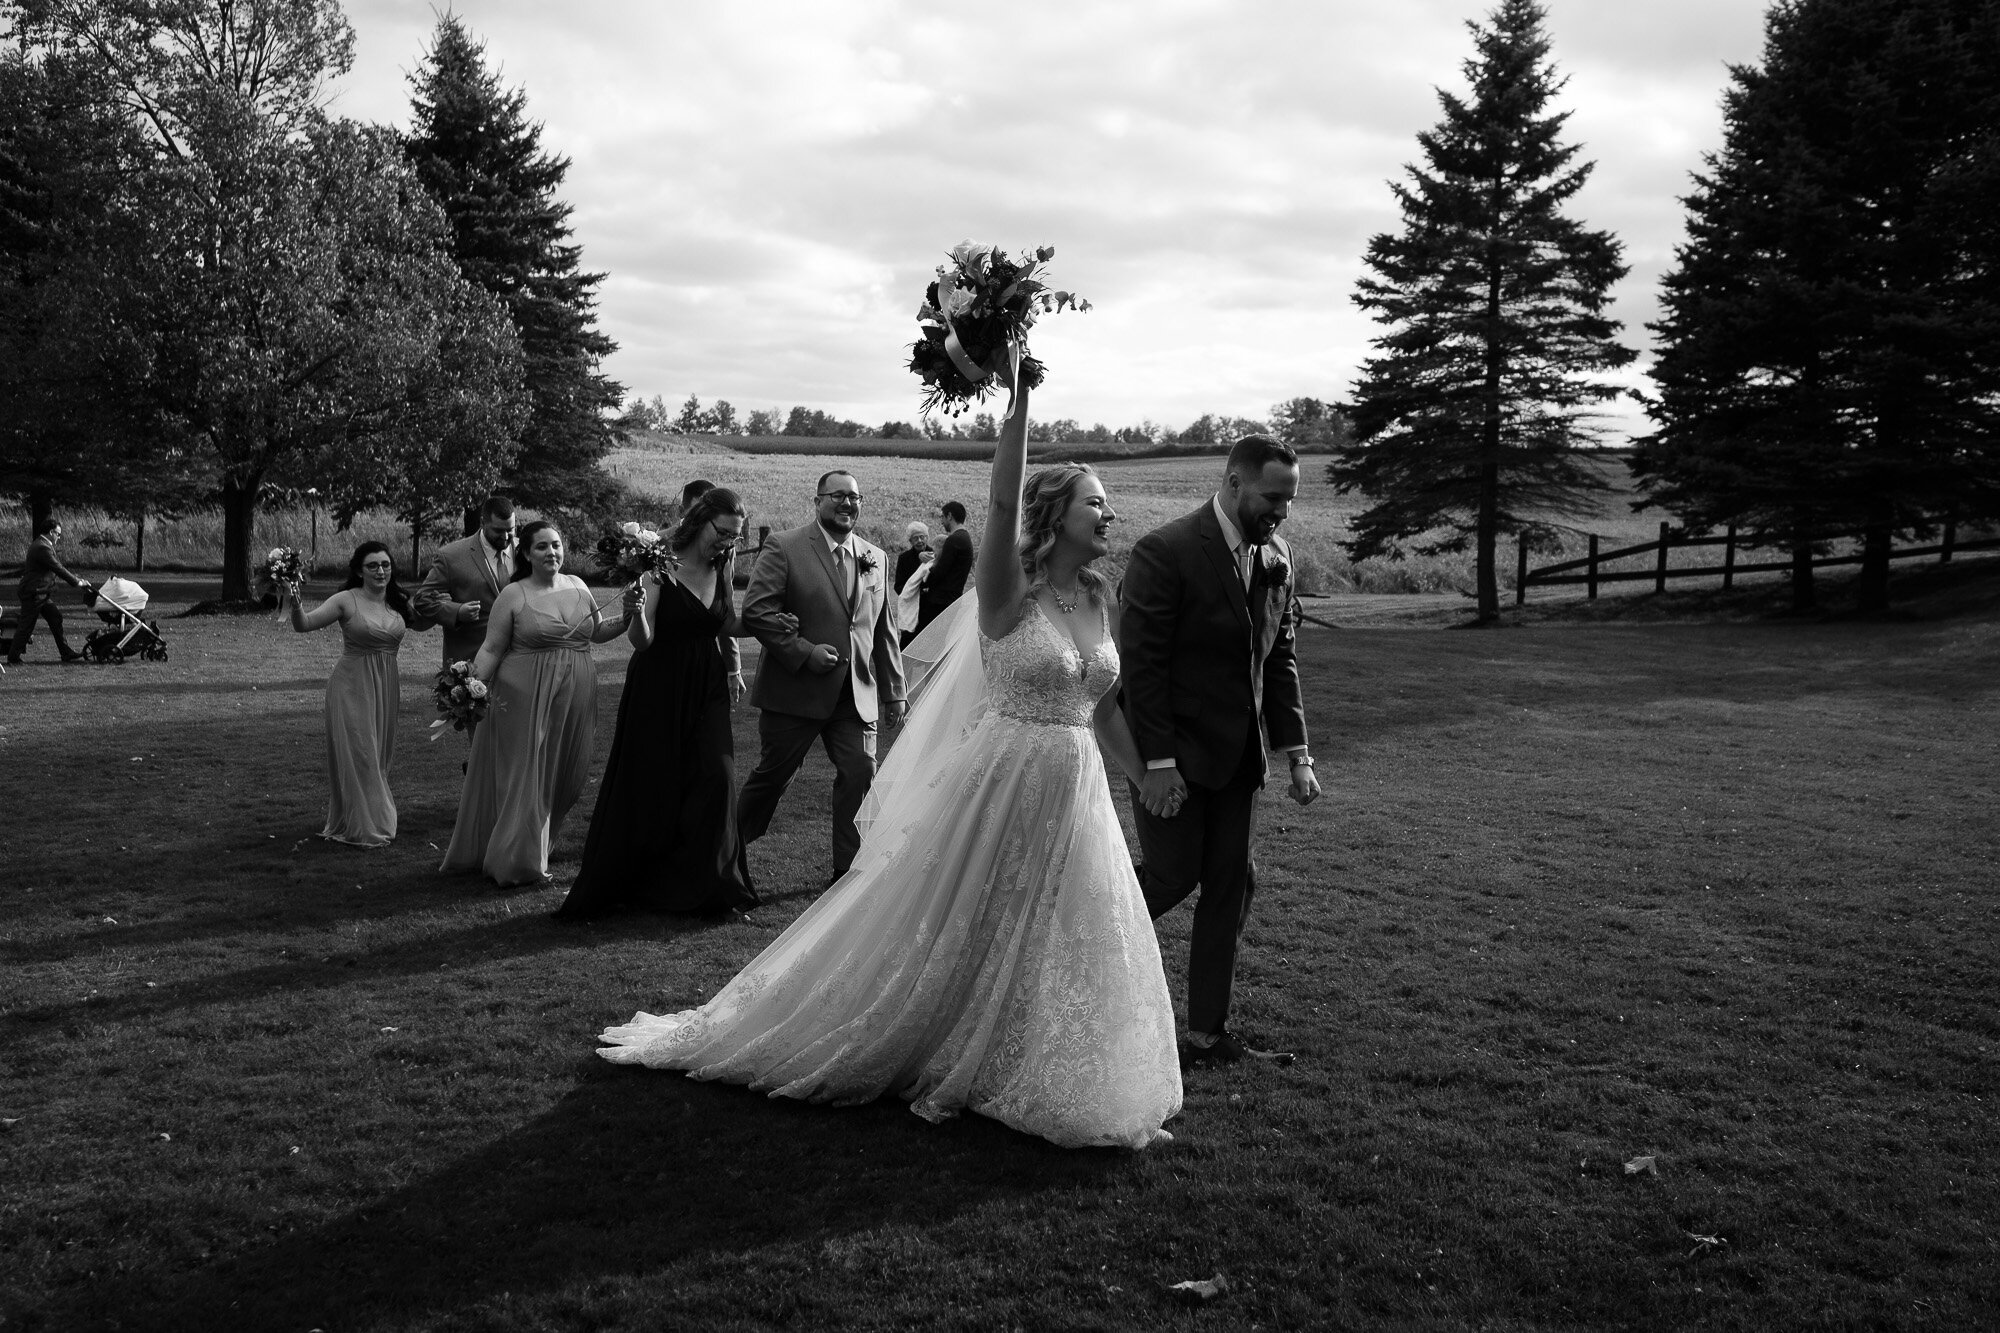  The bride and groom walk back up the aisle during the outdoor wedding ceremony at the Three Bridges event centre located outside of Waterloo, Ontario. Photograph by Toronto wedding photographer Scott Williams. 